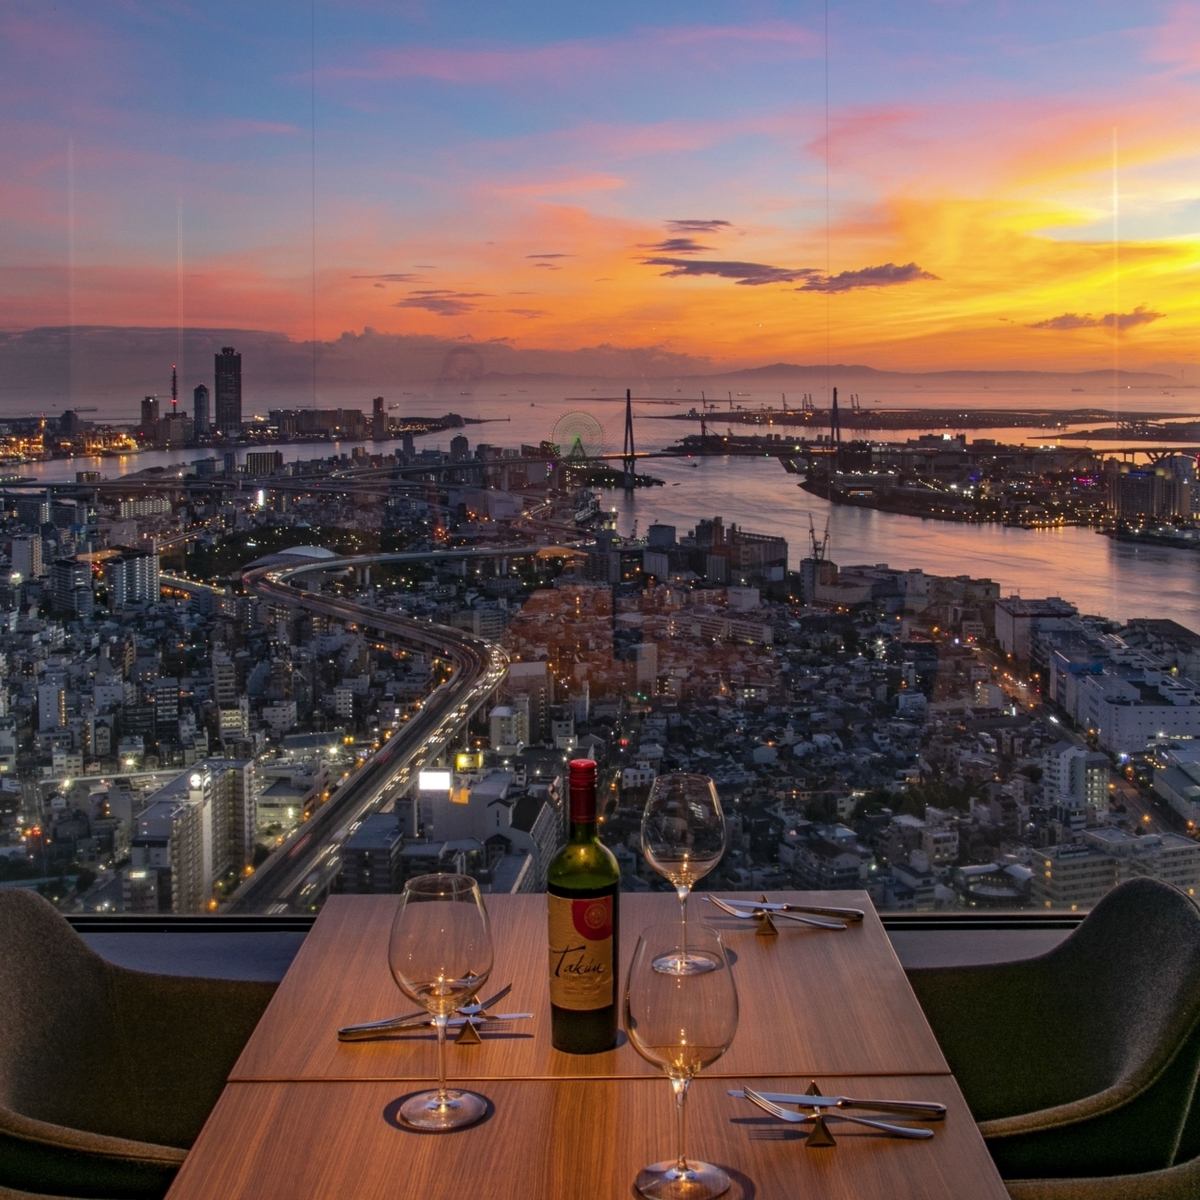 You can overlook the night view from the top floor of Art Hotel Osaka Bay Tower.